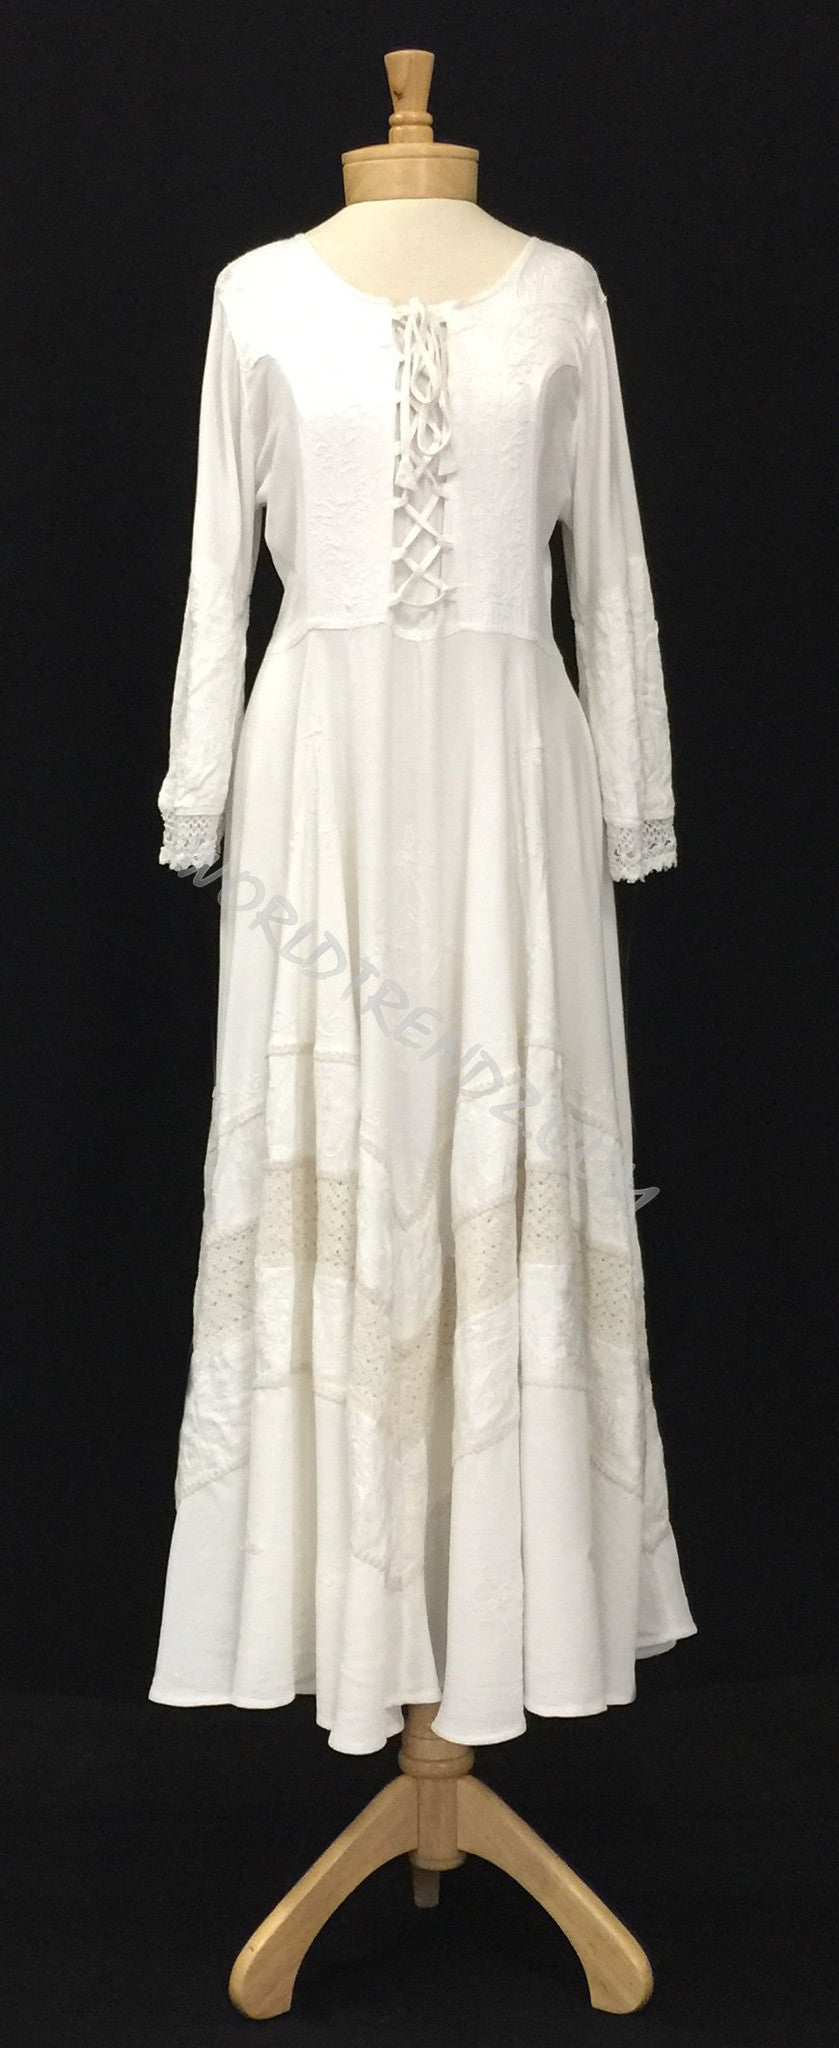 LACE-UP MEDIEVAL DRESS WHITE